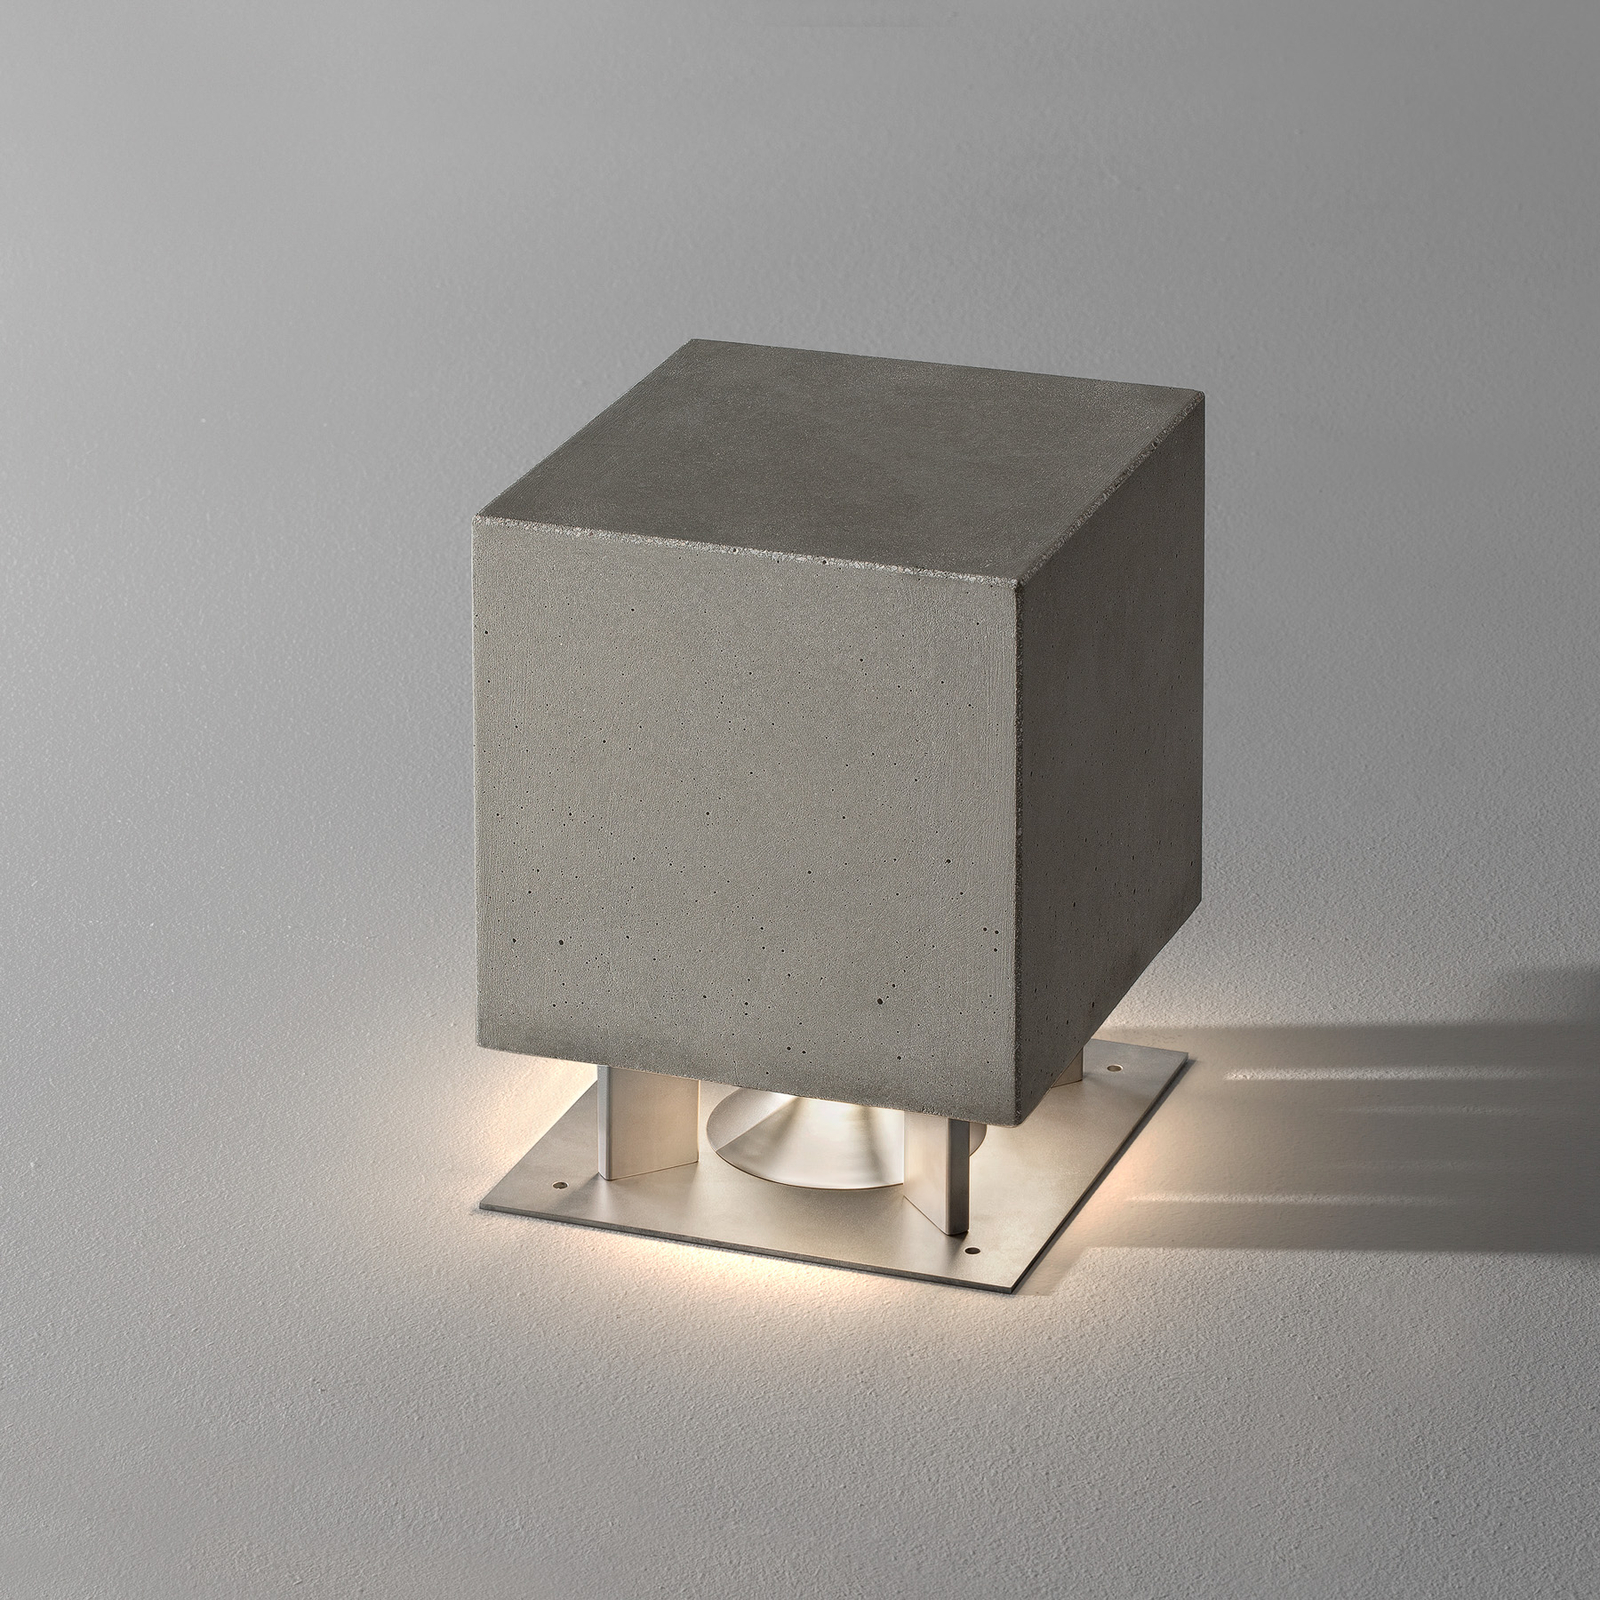 OLEV Cemento LED pillar light with a speaker